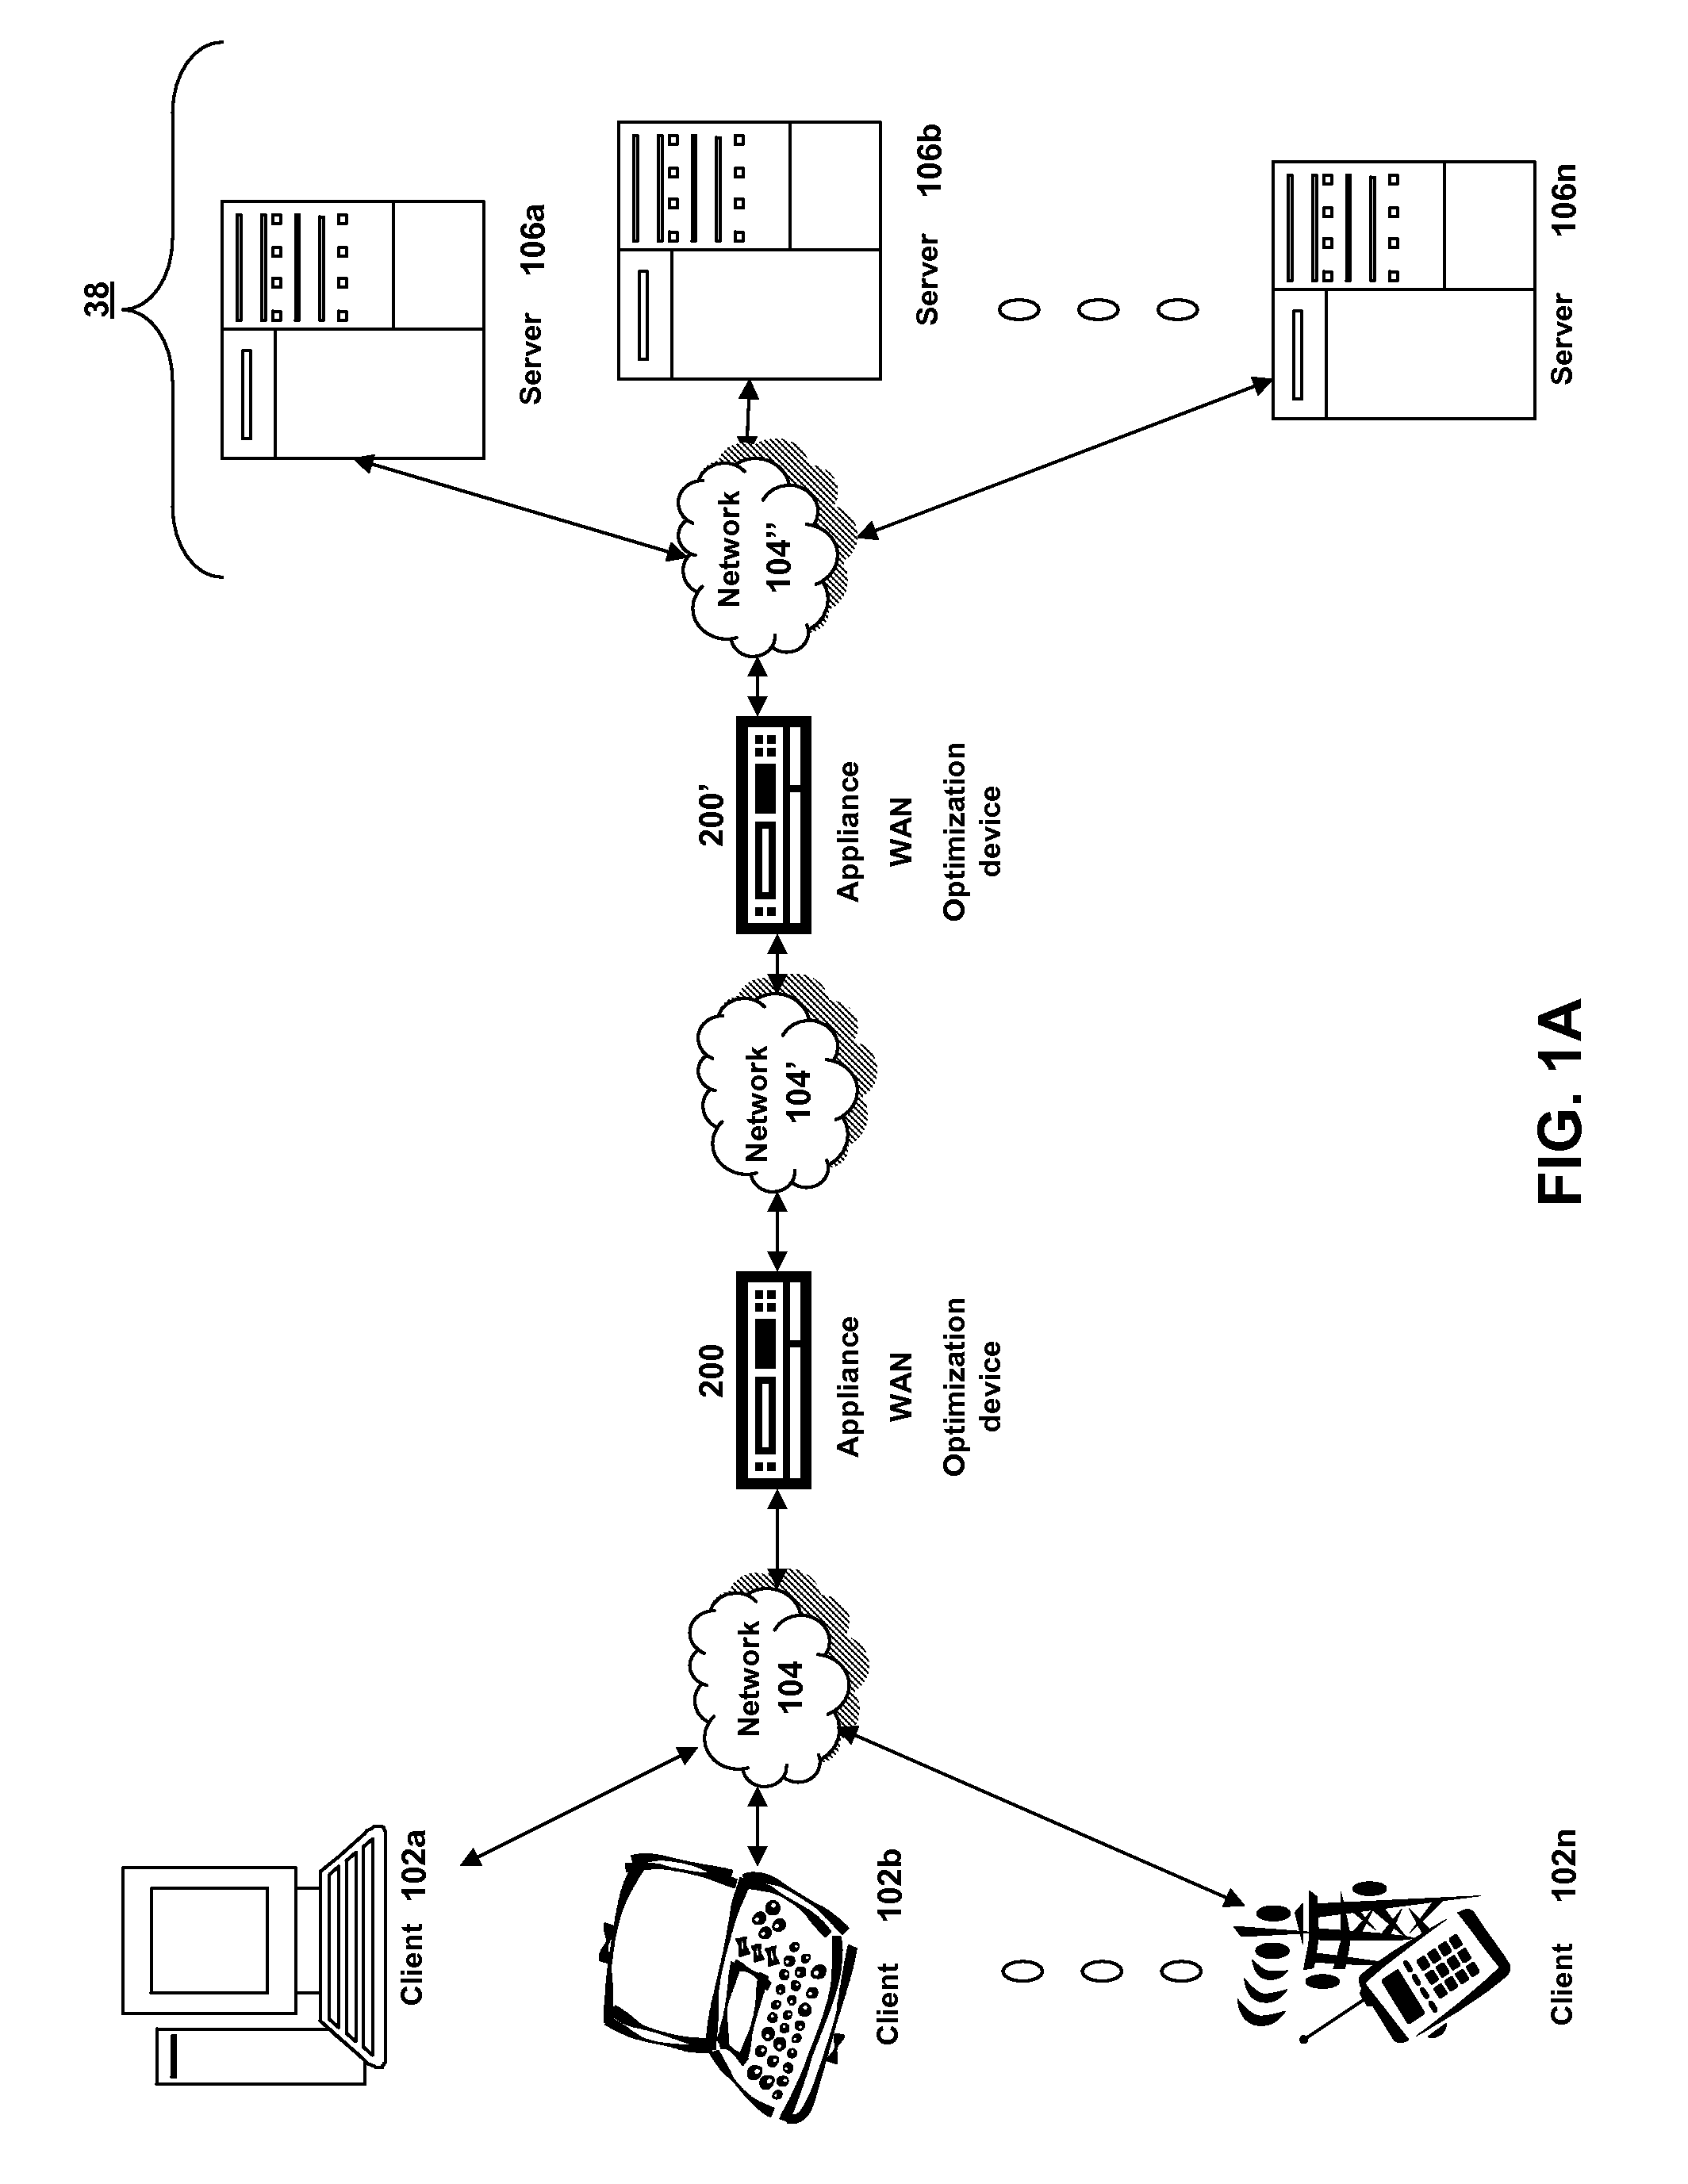 Systems and methods of providing security and reliability to proxy caches